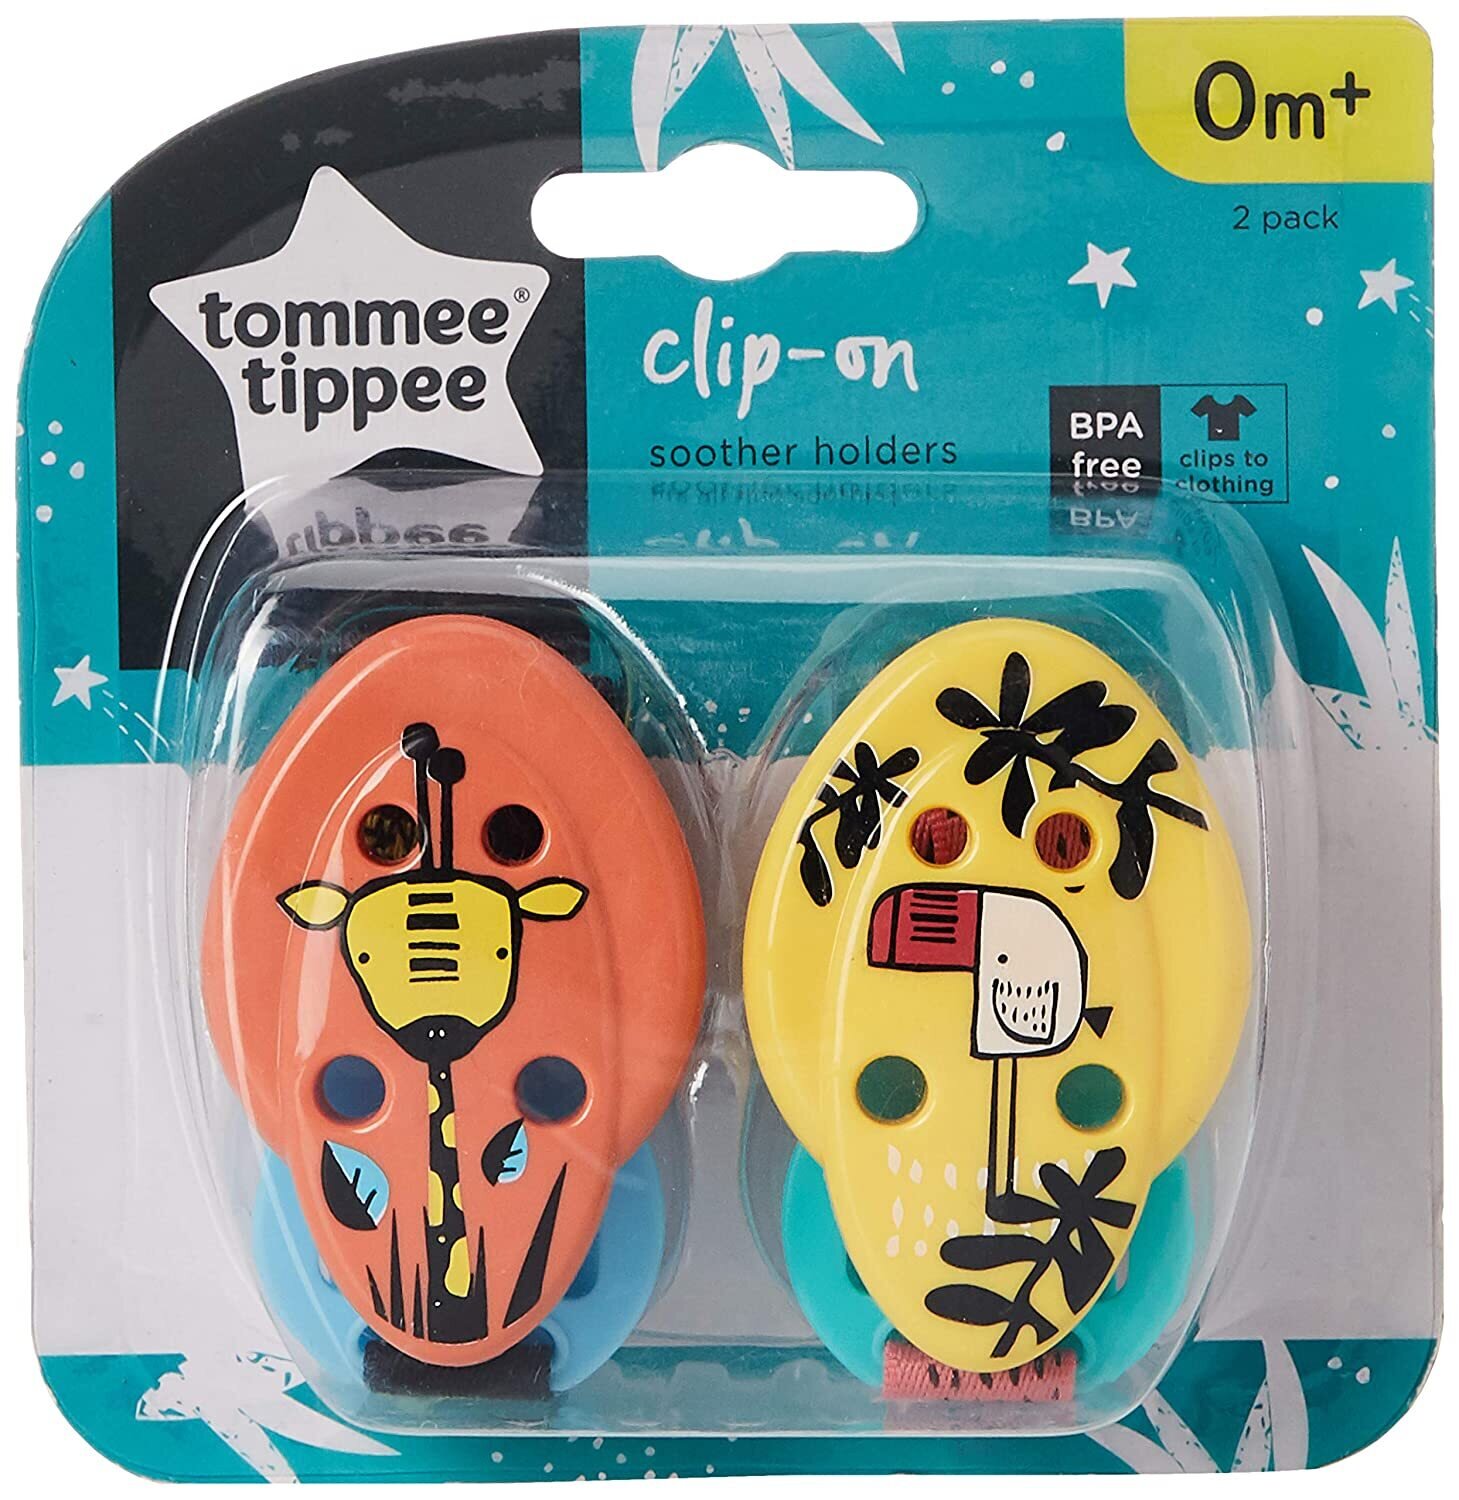 TOMMEE TIPPEE CLIP-ON